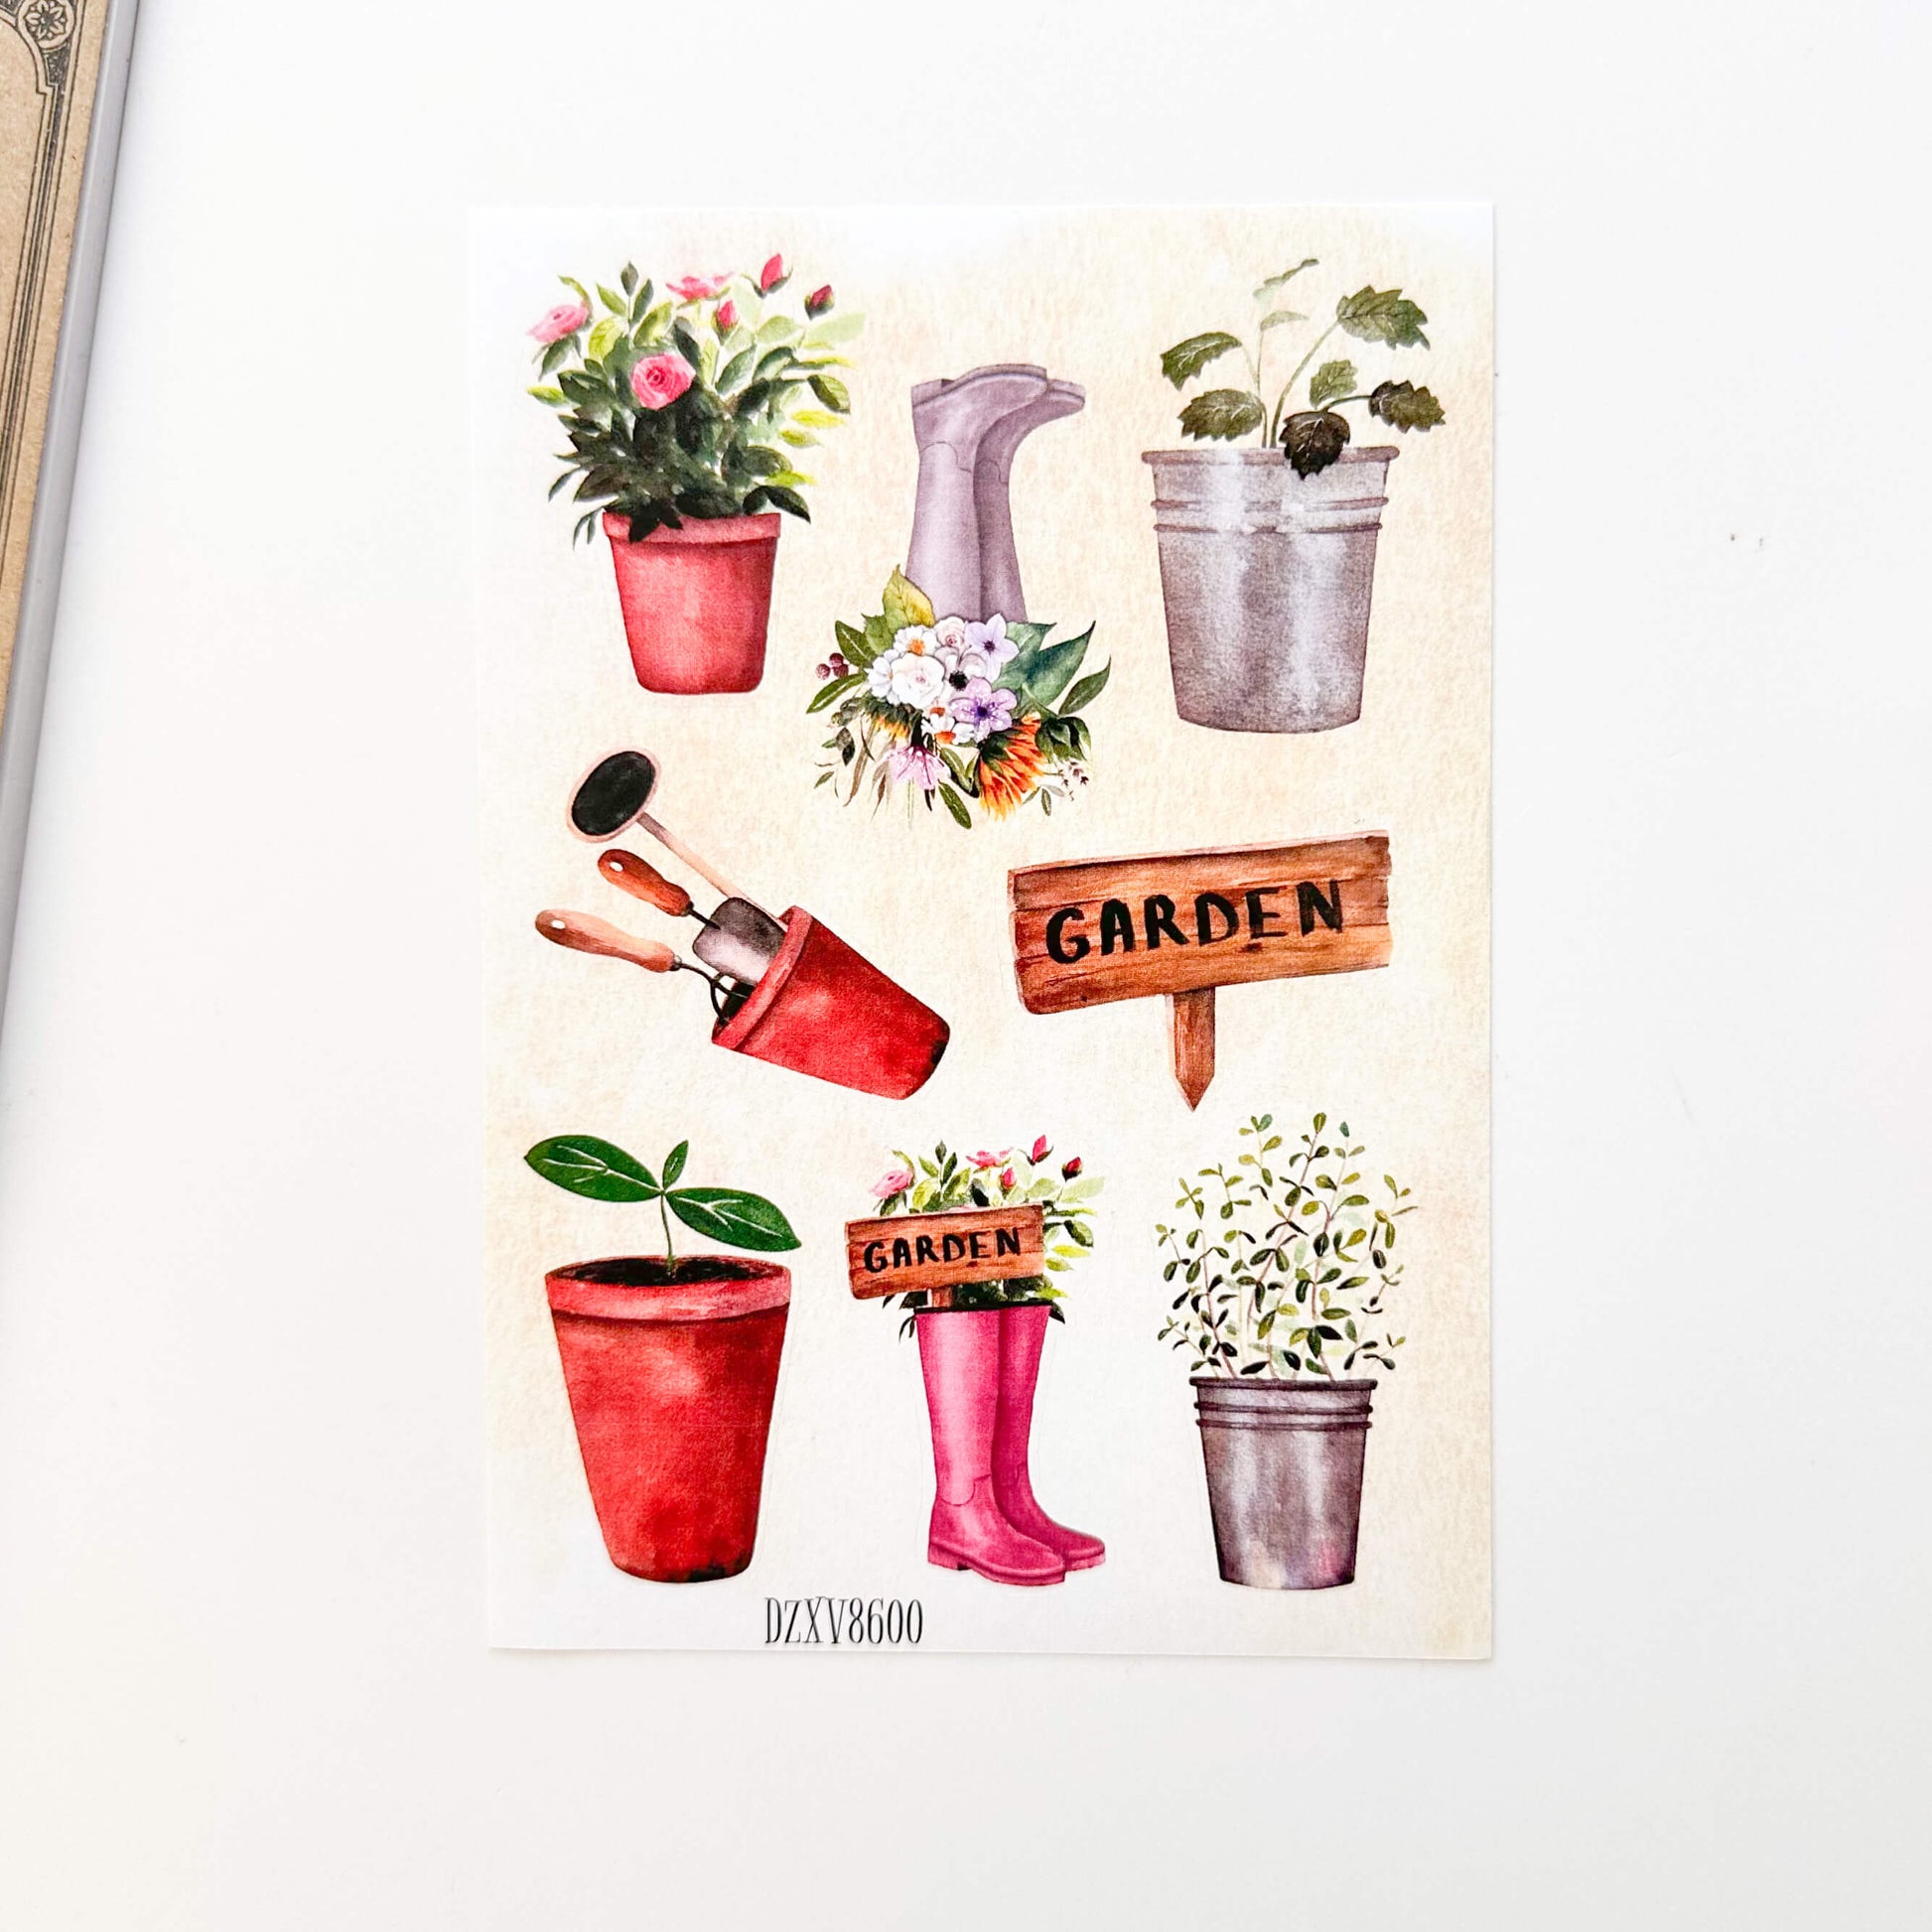 Garden sticker sheet with illustrations of garden boots and plants